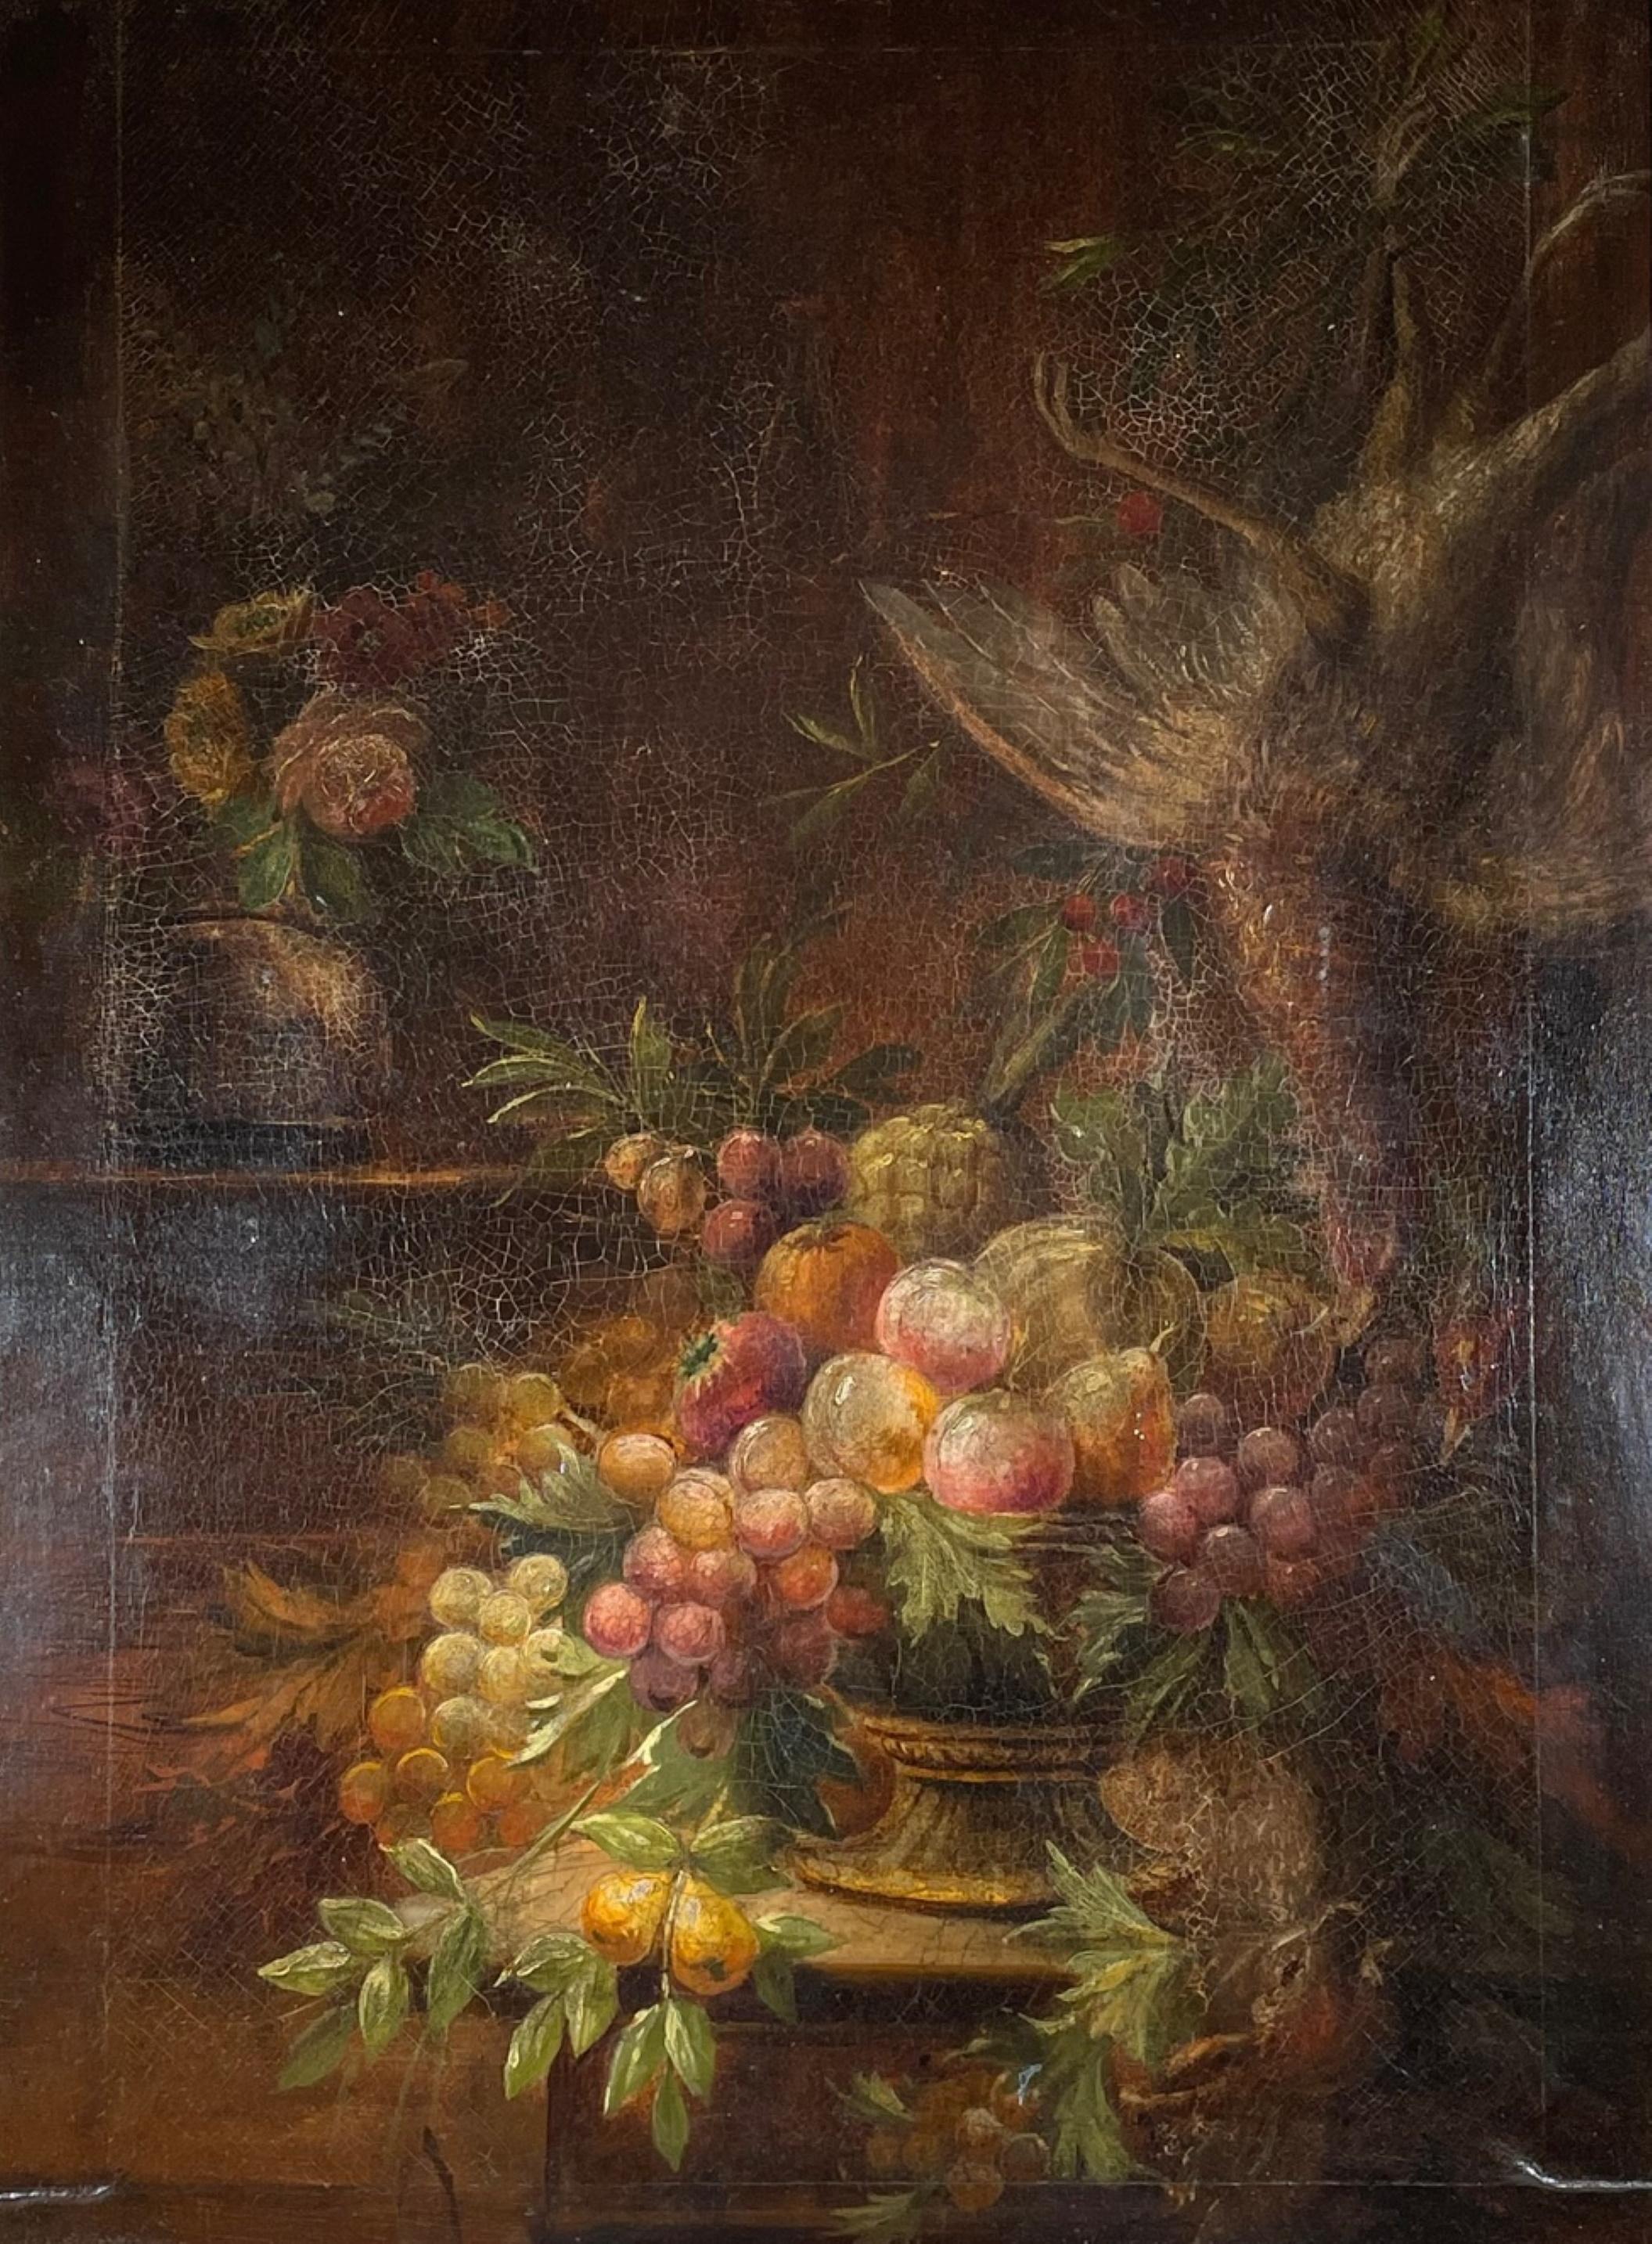 Italian 17th century still life painting in period carved gilt frame

Italian school still life painting from the workshop of a great master. The 17th century Baroque painting in oil on canvas is beautifully composed and with great detail. A bowl